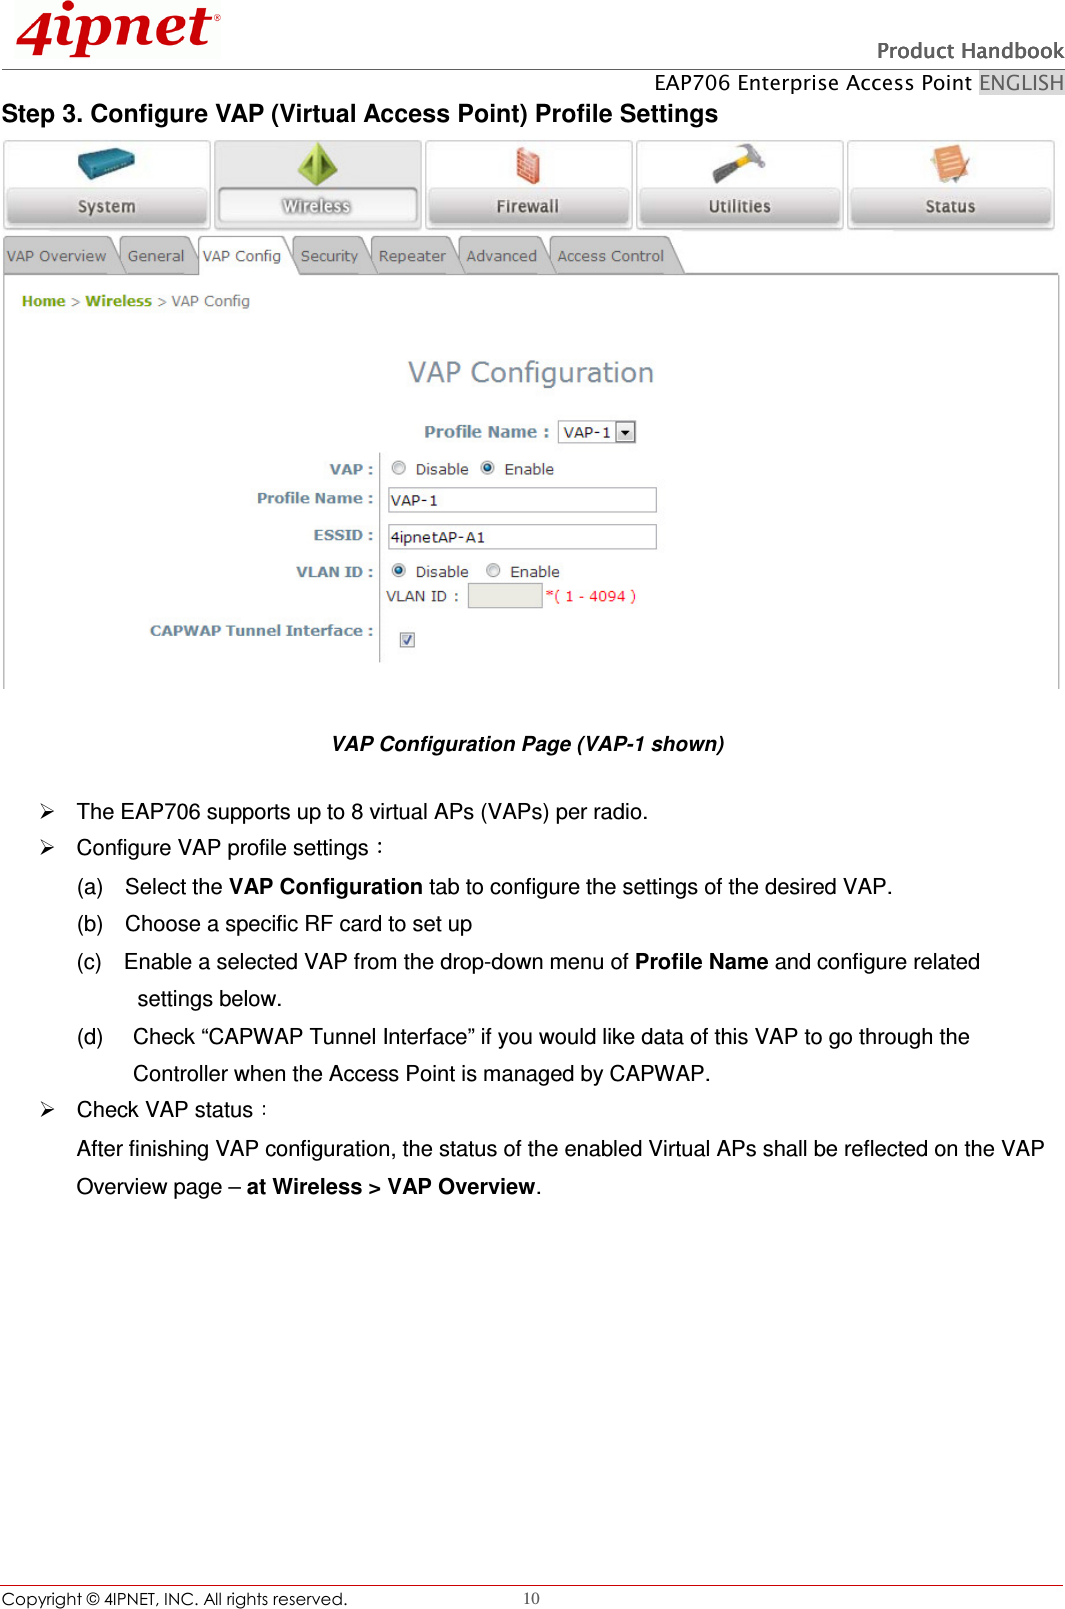   Product HandbookProduct HandbookProduct HandbookProduct Handbook    EAP706 Enterprise Access Point ENGLISH Copyright © 4IPNET, INC. All rights reserved.                                                              10 Step 3. Configure VAP (Virtual Access Point) Profile Settings  VAP Configuration Page (VAP-1 shown)   The EAP706 supports up to 8 virtual APs (VAPs) per radio.       Configure VAP profile settings  (a)    Select the VAP Configuration tab to configure the settings of the desired VAP.   (b)    Choose a specific RF card to set up   (c)    Enable a selected VAP from the drop-down menu of Profile Name and configure related         settings below. (d)    Check “CAPWAP Tunnel Interface” if you would like data of this VAP to go through the Controller when the Access Point is managed by CAPWAP.     Check VAP status  After finishing VAP configuration, the status of the enabled Virtual APs shall be reflected on the VAP Overview page – at Wireless &gt; VAP Overview.   